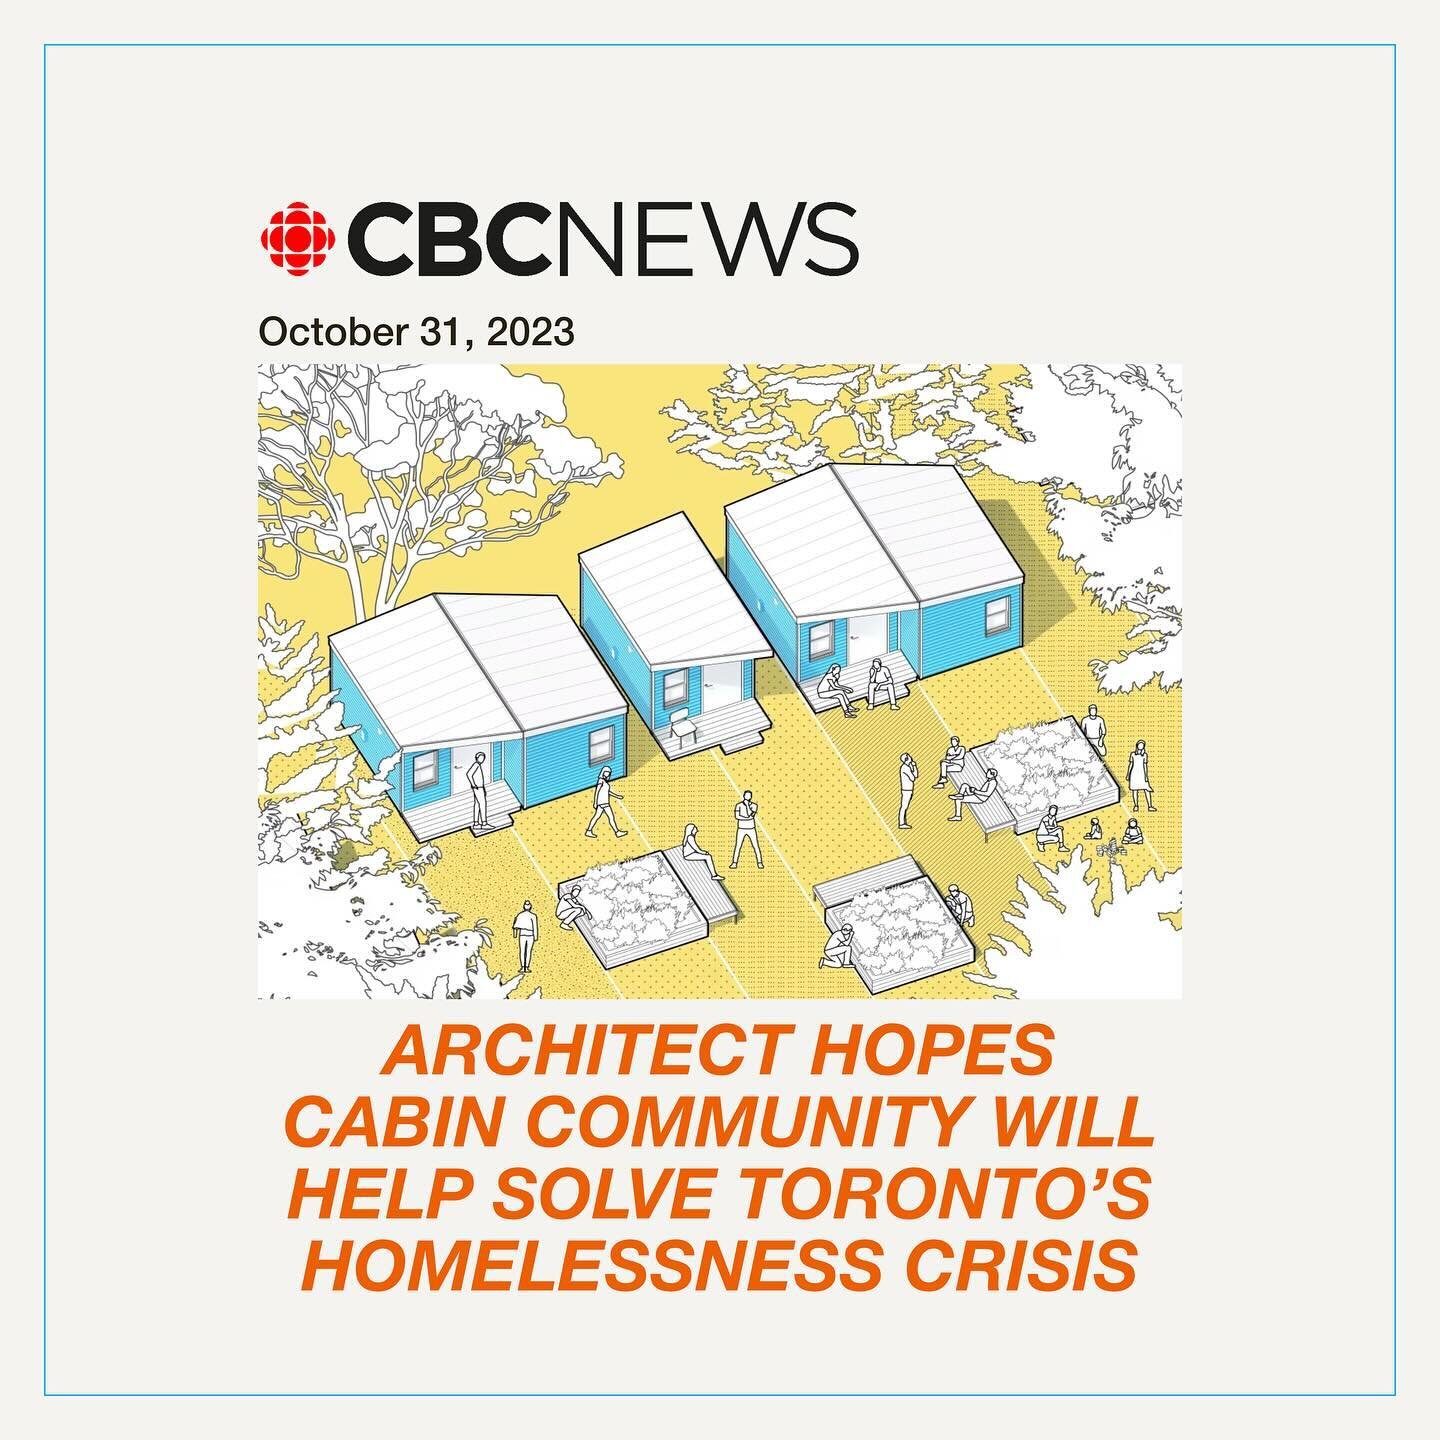 2SH received our first media coverage on CBC News after our fundraising event last week. John van Nostrand and Khaleel Seivwright were interviewed as part of the piece. Follow the link in our bio to read more and donate to support our project!